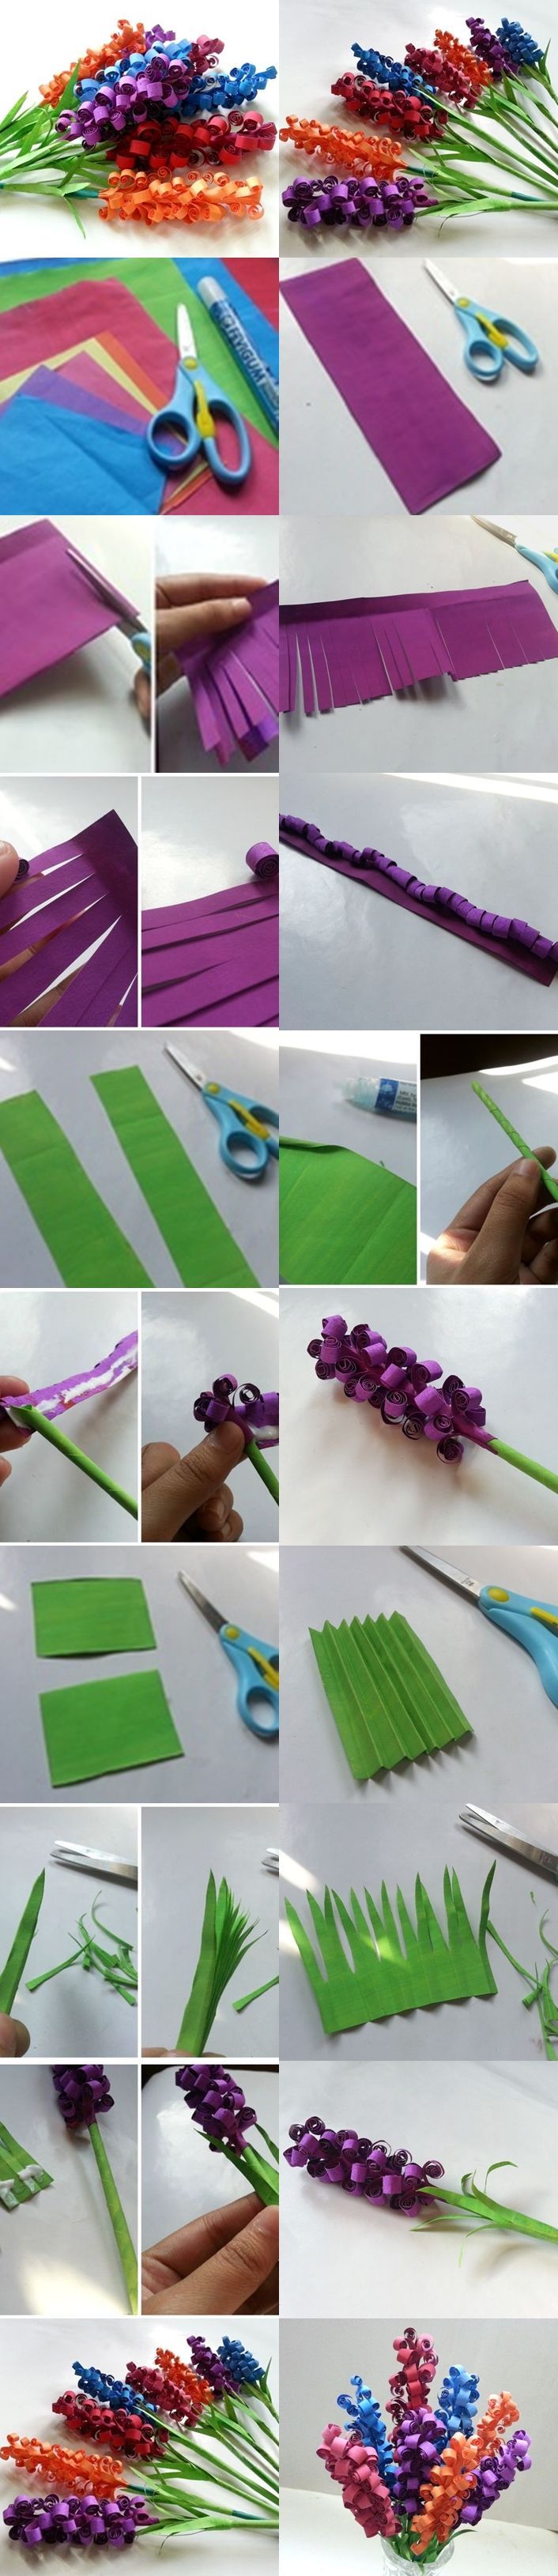 DIY Swirly Paper Flowers look really cute. My first thought was to try rolling t